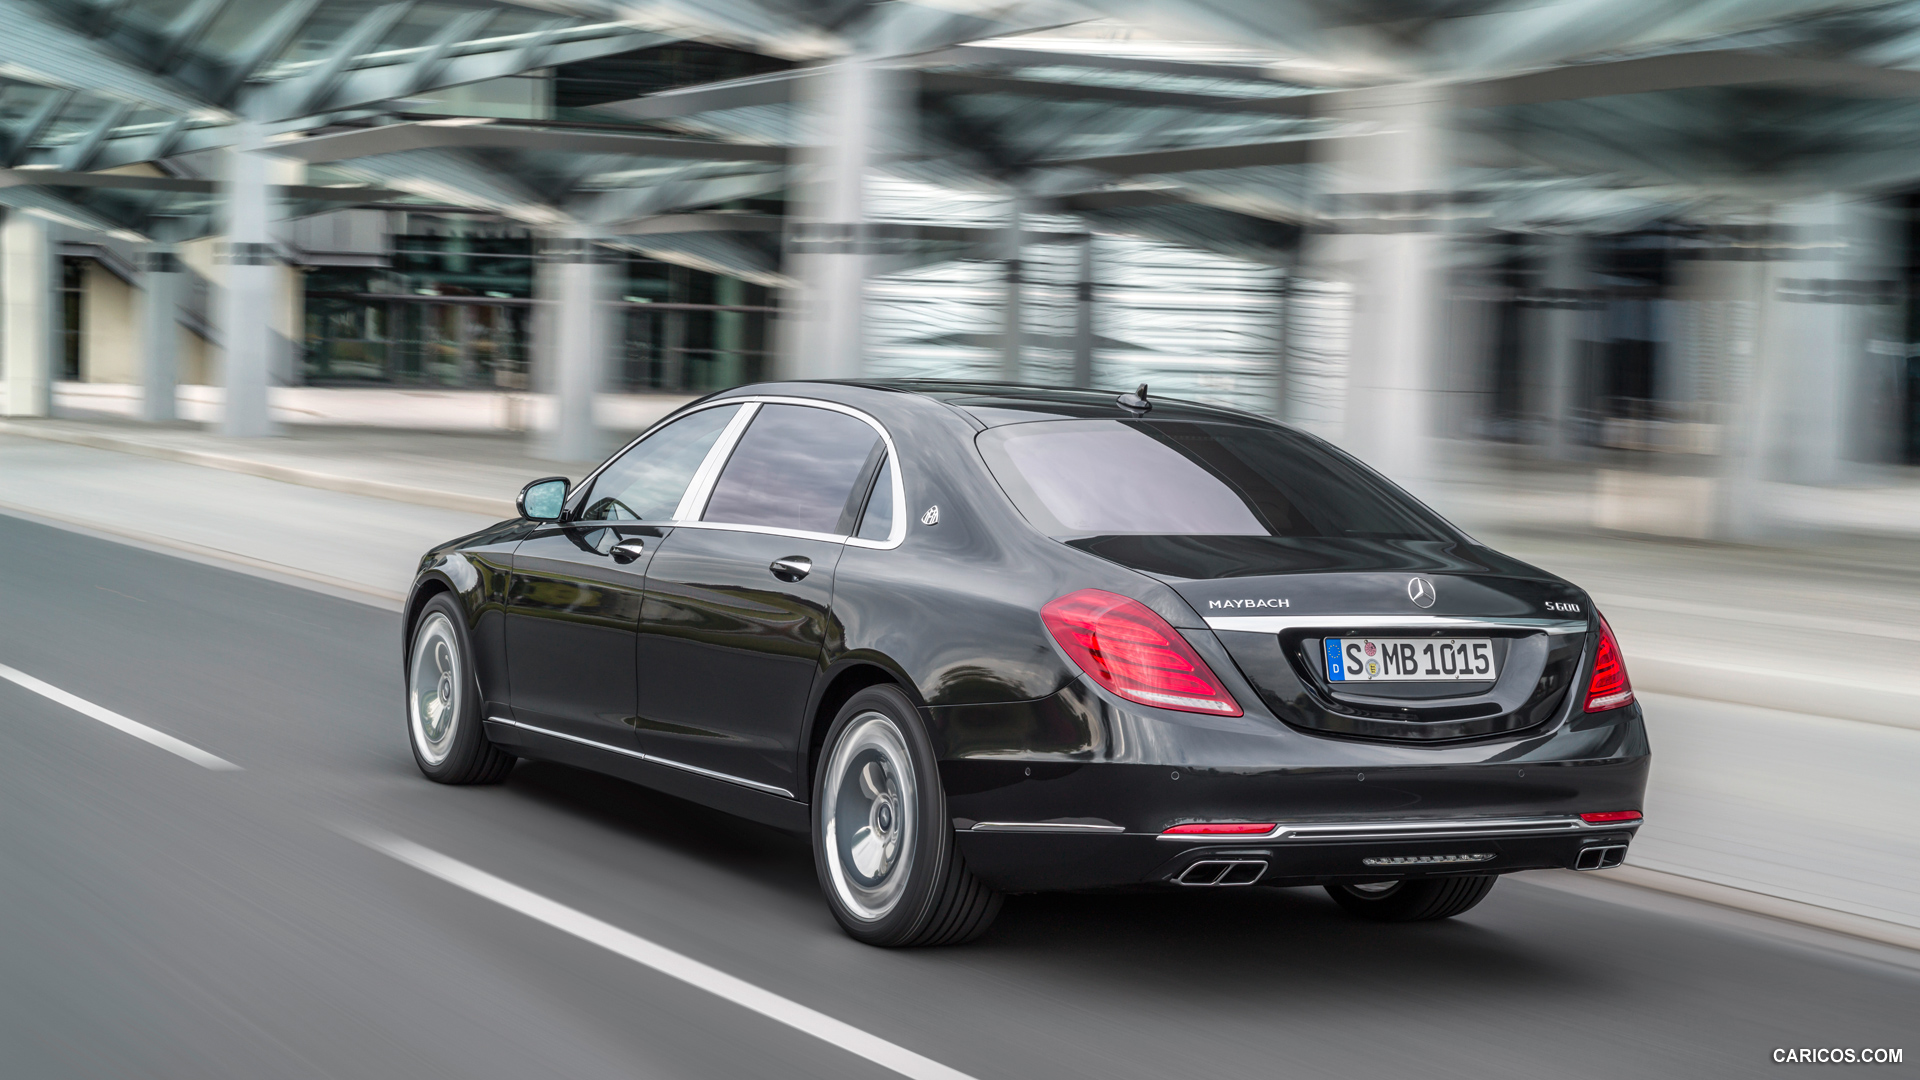 2016 Mercedes-Maybach S-Class S600 - Rear, #18 of 225